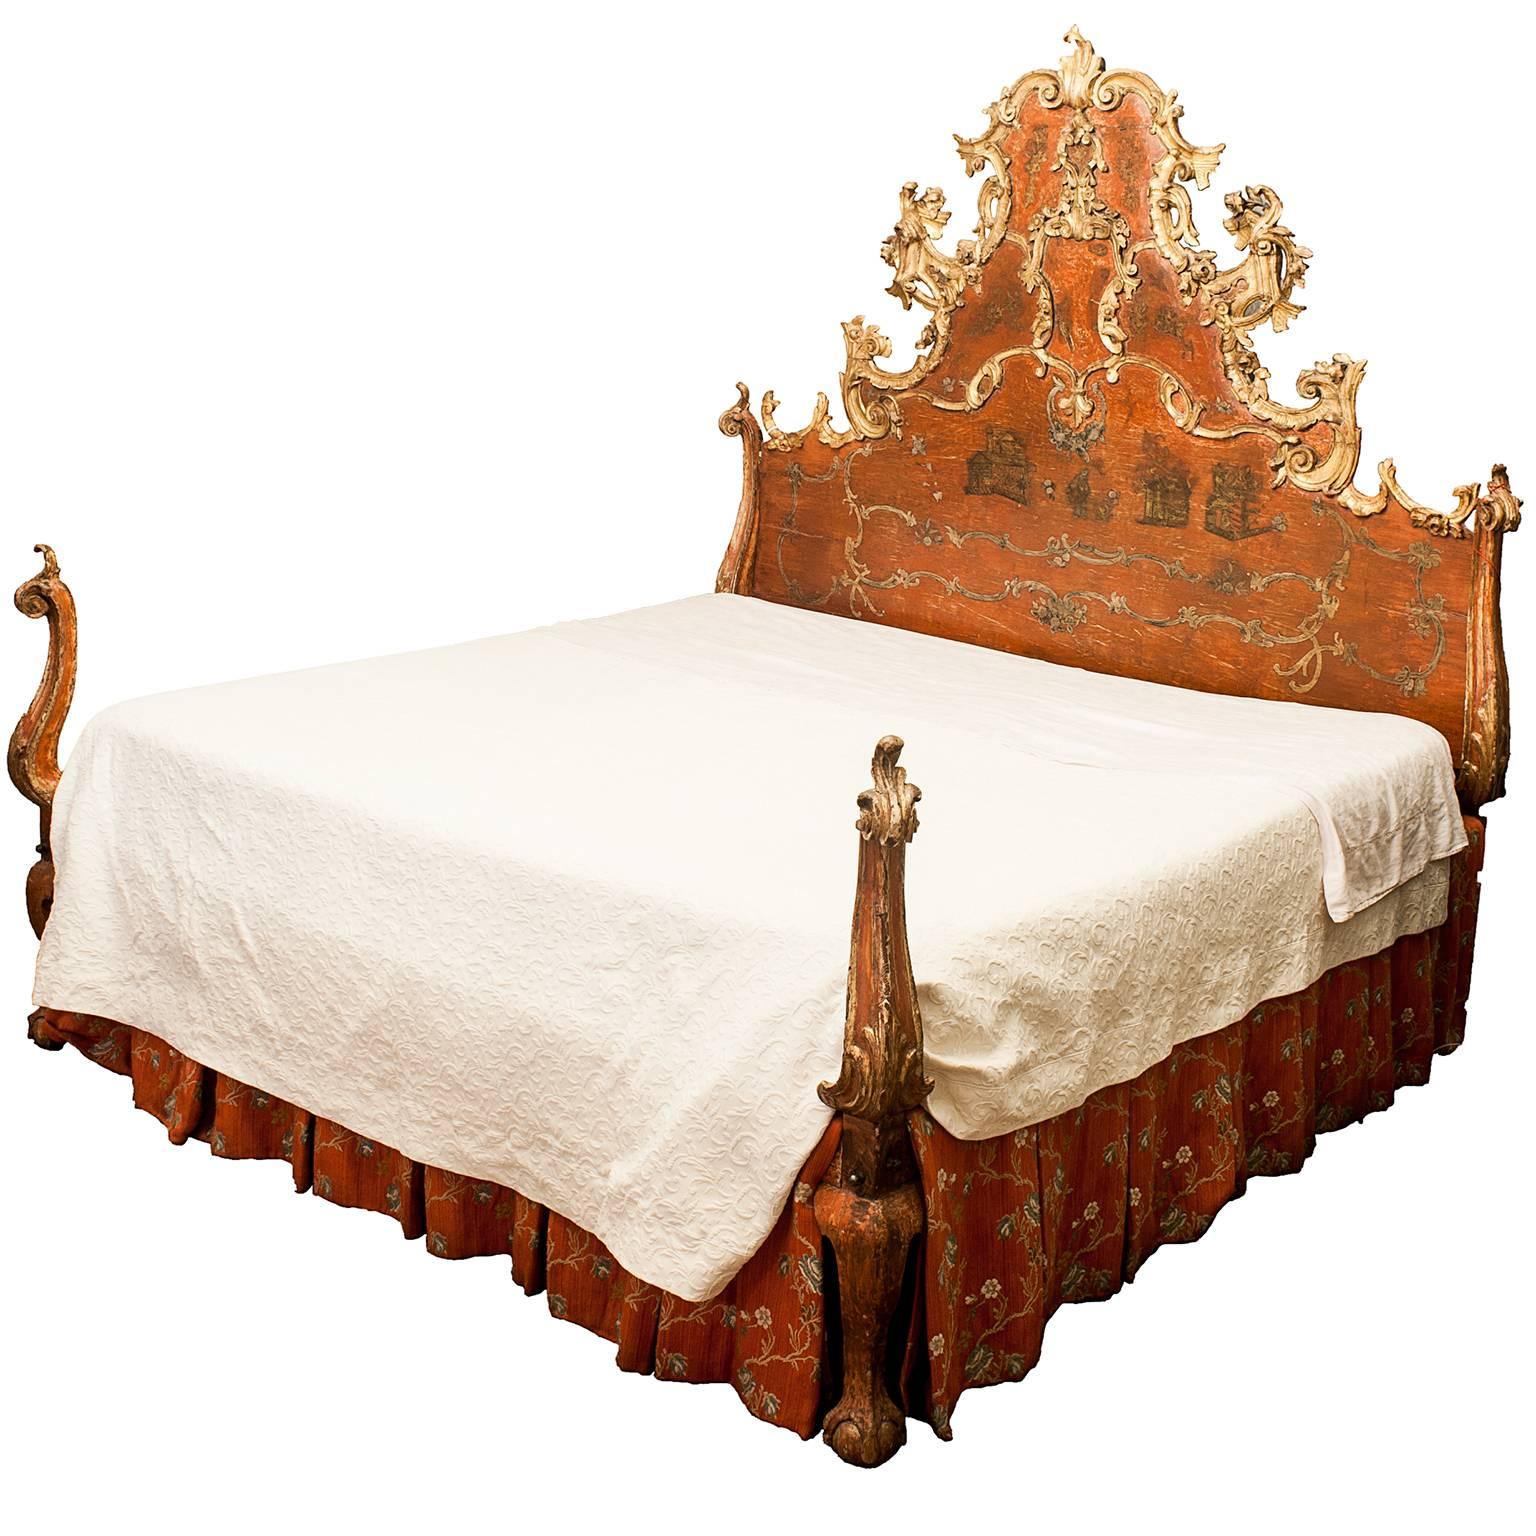 Very important Spanish baroque bed, in "Chinoisserie" styled painted.
Amazing headboard with Chinese scenes decorate this piece, and patinated giltwood.